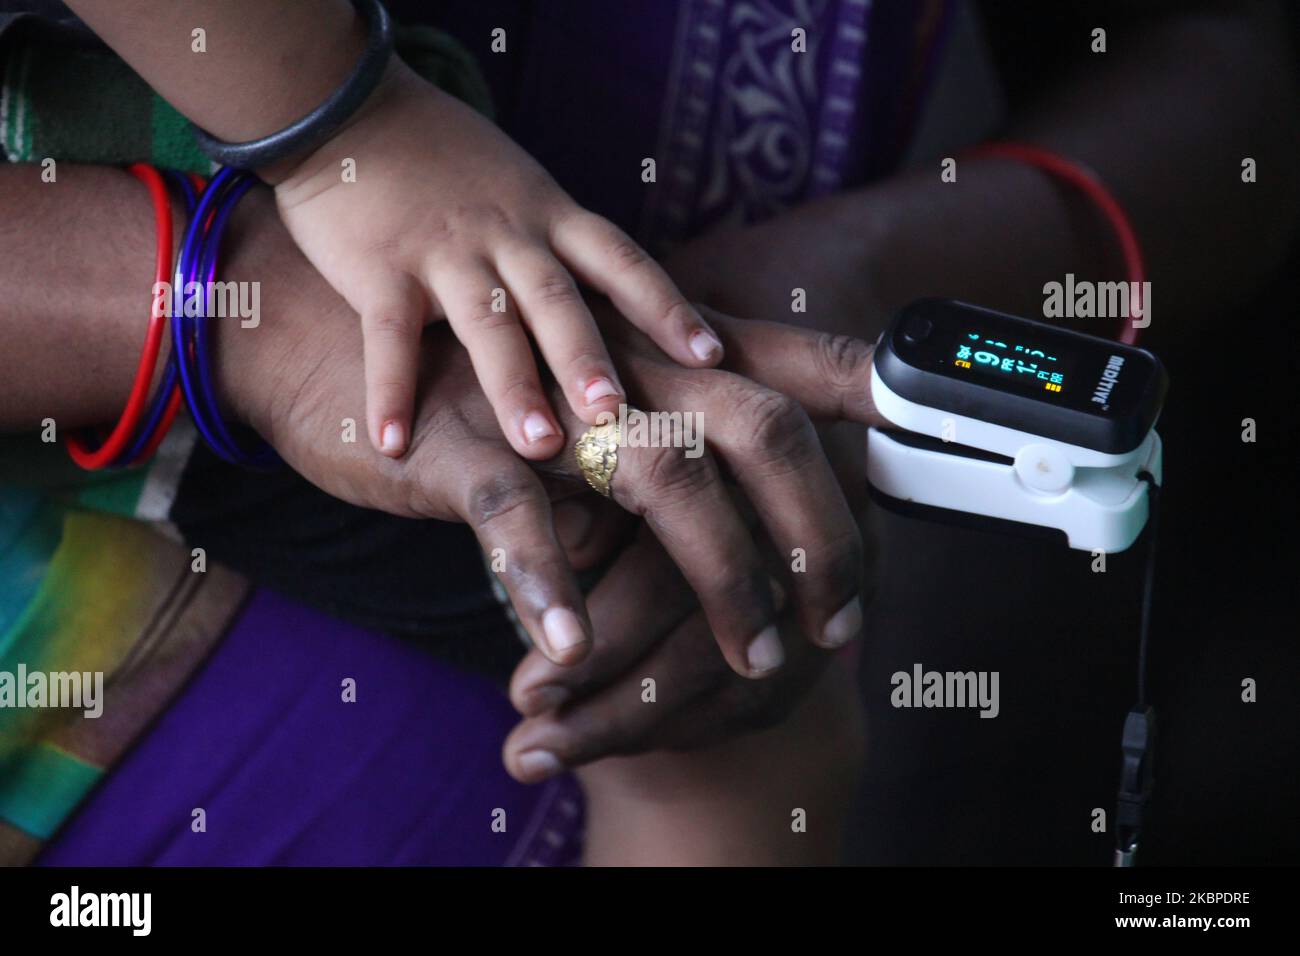 A pulse oximeter is placed on the hand of a resident during a medical check-up in the Dharavi slum area of Mumbai, India on May 29, 2020. India continues in nationwide lockdown to control the spread of the Coronavirus (COVID-19) pandemic. (Photo by Himanshu Bhatt/NurPhoto) Stock Photo